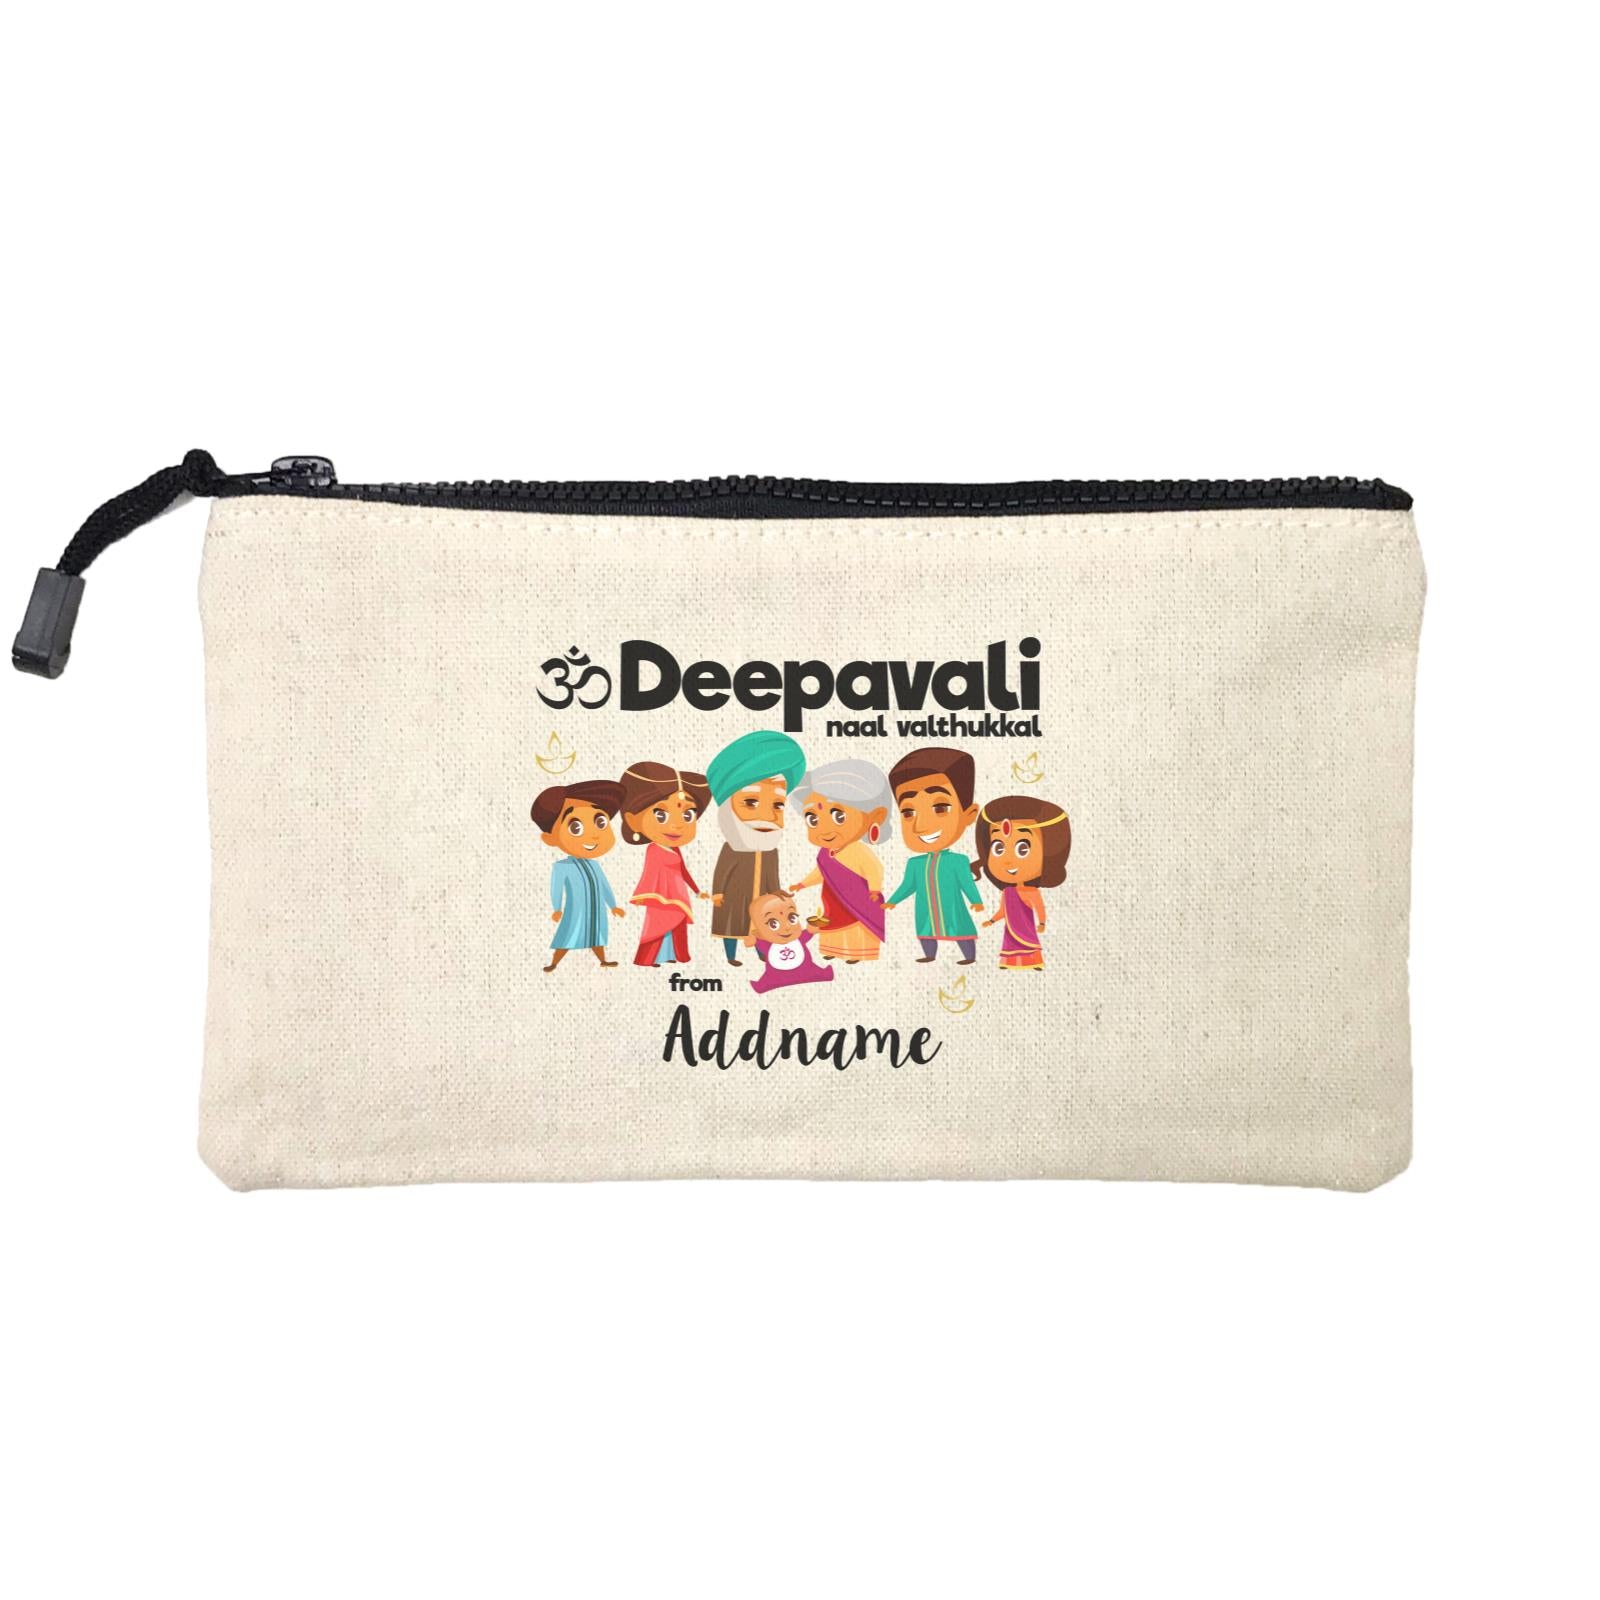 Cute Family Extended OM Deepavali From Addname Mini Accessories Stationery Pouch